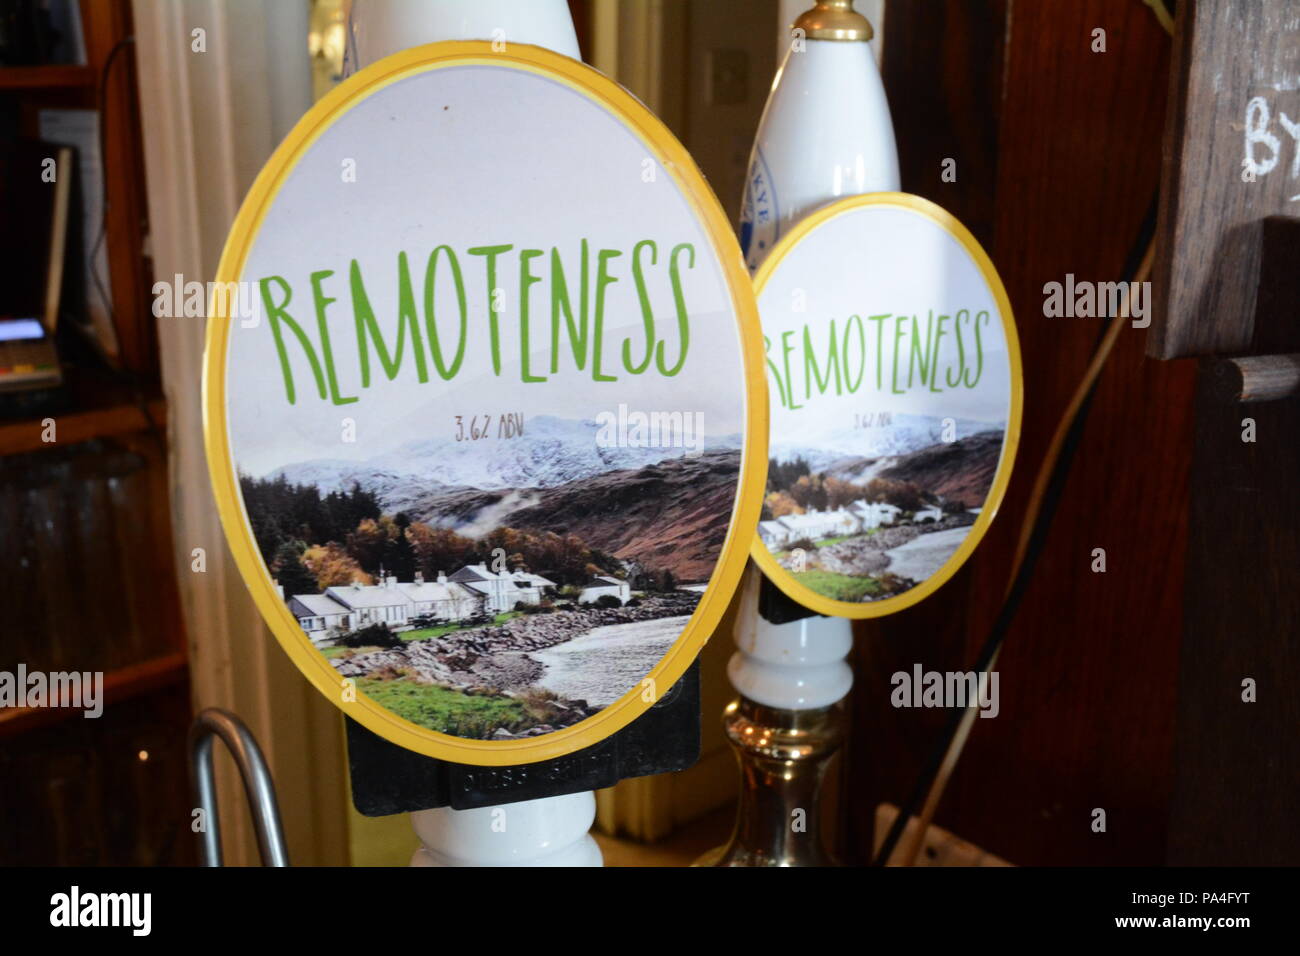 Remoteness - the local draught ale at The Old Forge, the most remote pub in the mainland UK, Inverie, Knoydart Peninsula, Scotland, Great Britain. Stock Photo